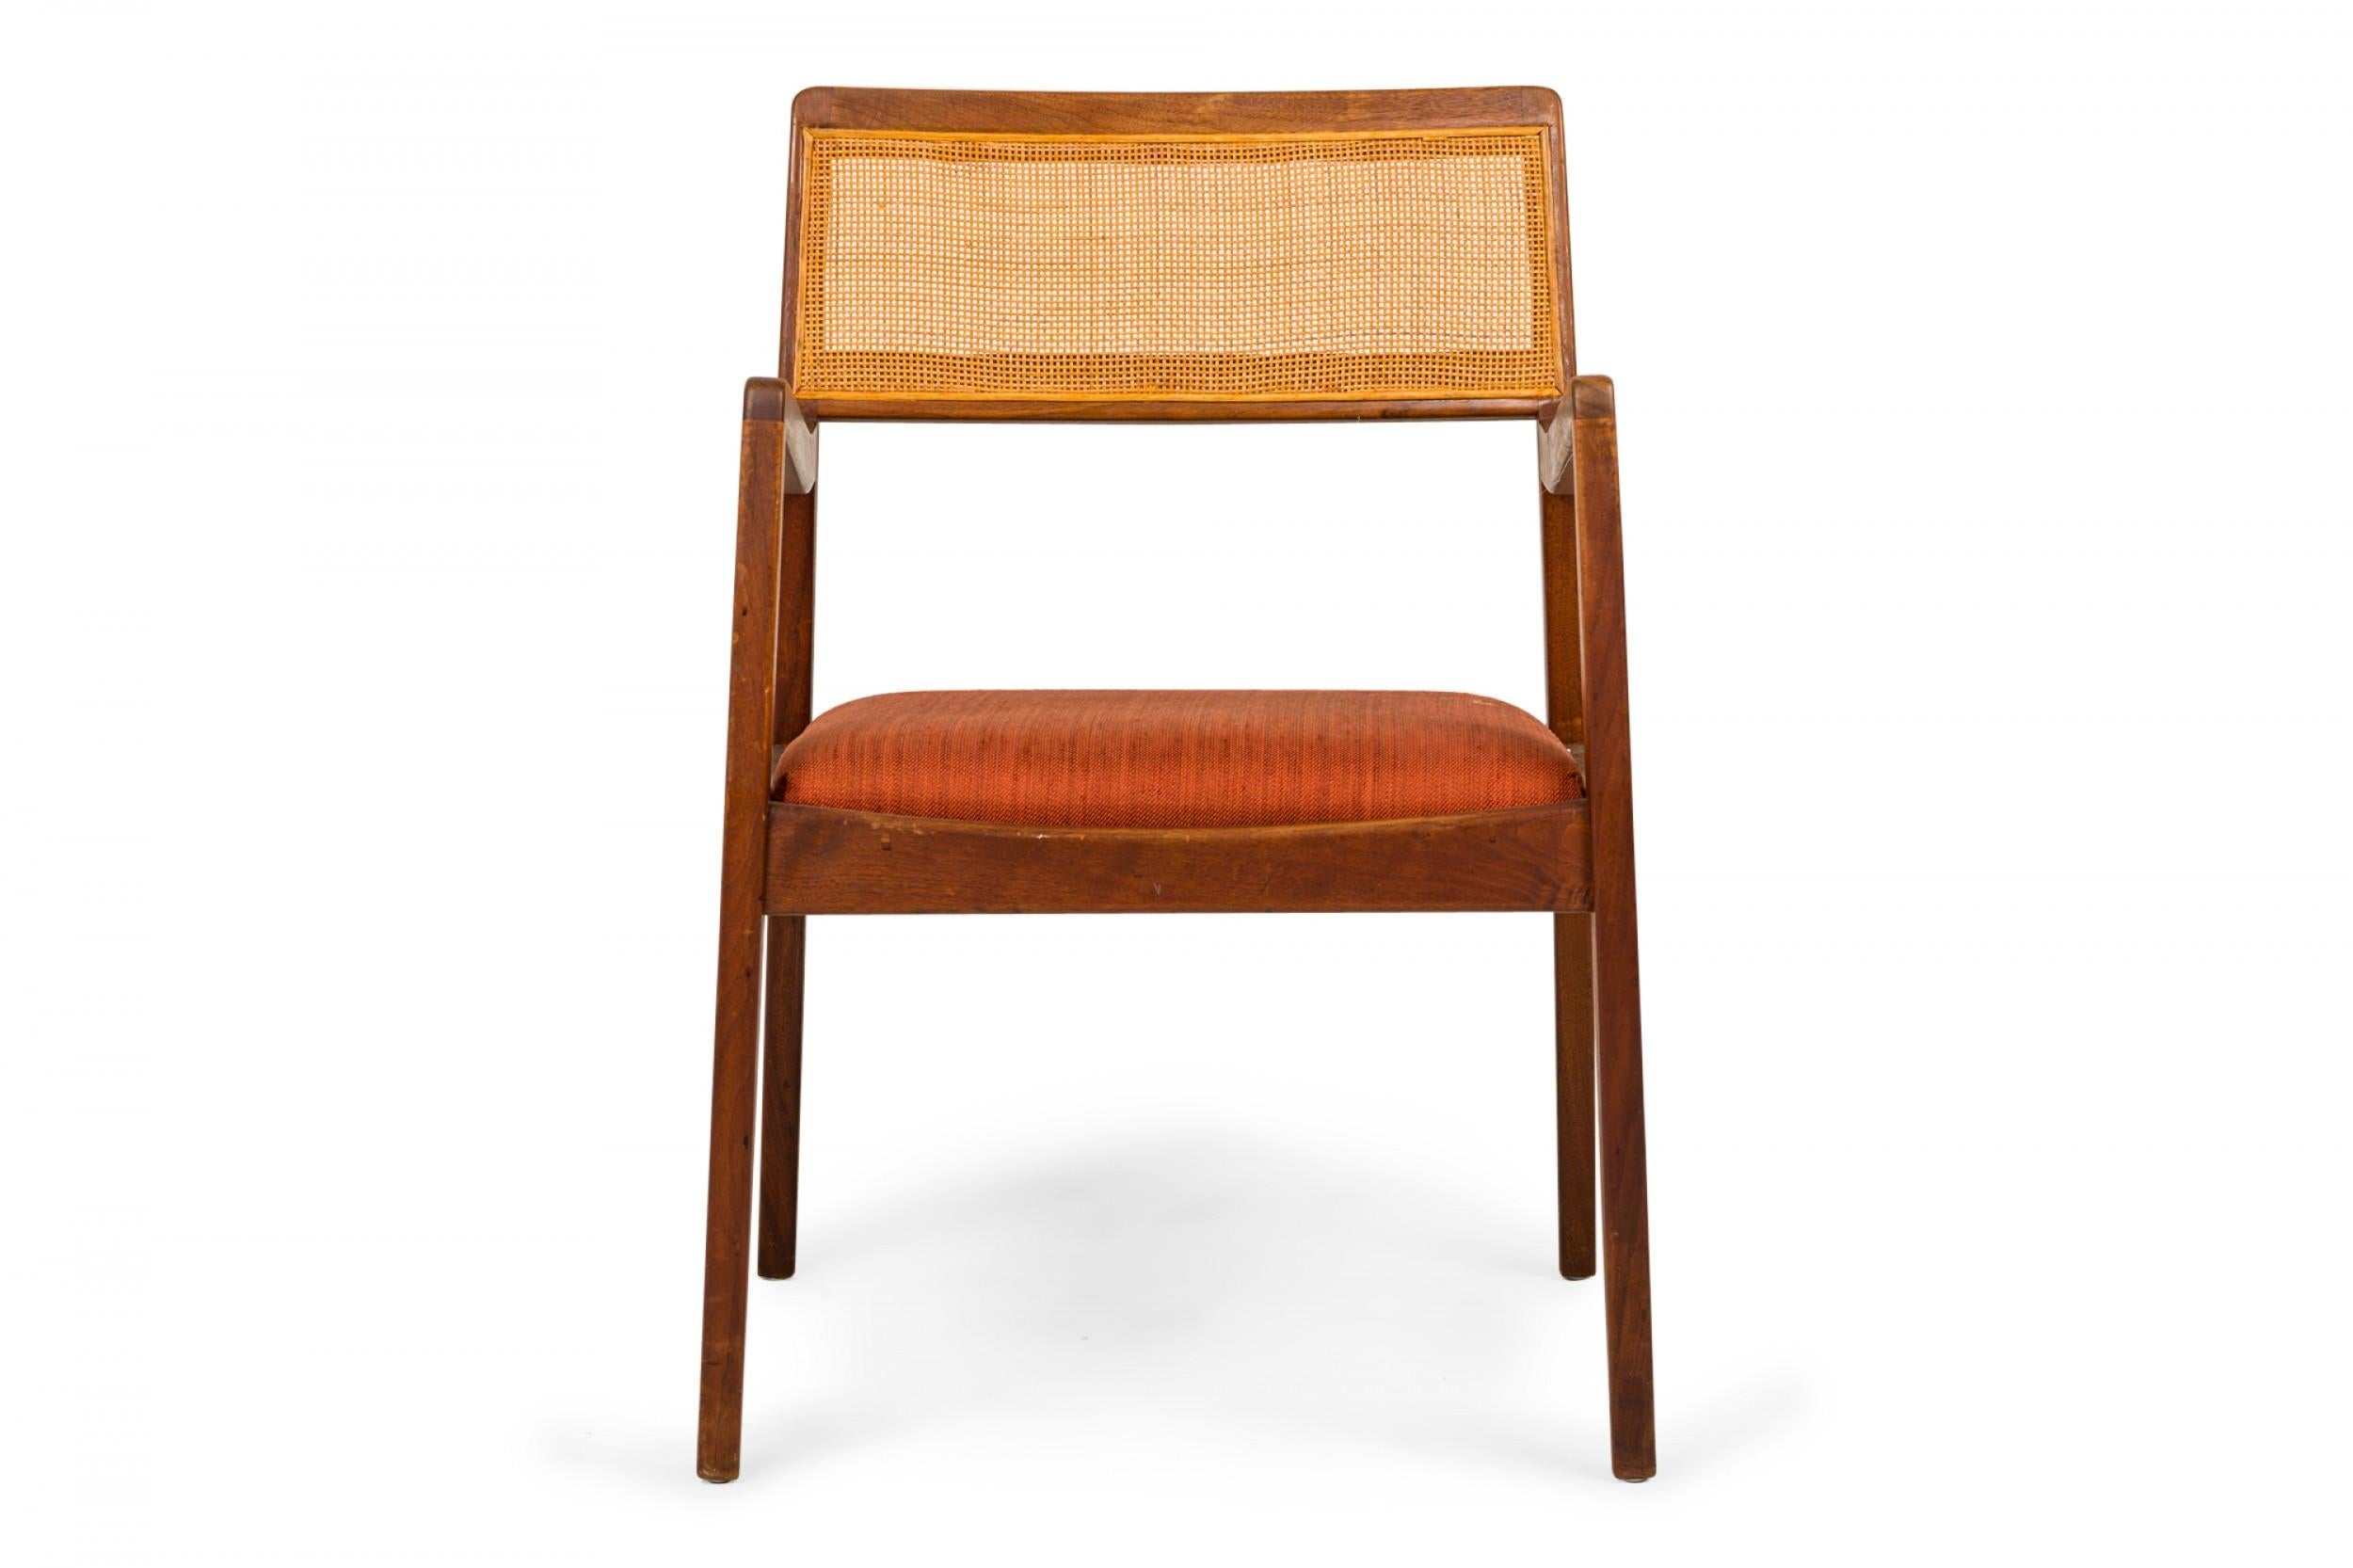 Set of 3 Danish mid-century dining/conference armchairs with teak wood frames, caned seat backs, and faintly striped orange fabric upholstered seats. (JENS RISOM)(PRICED AS SET)
 